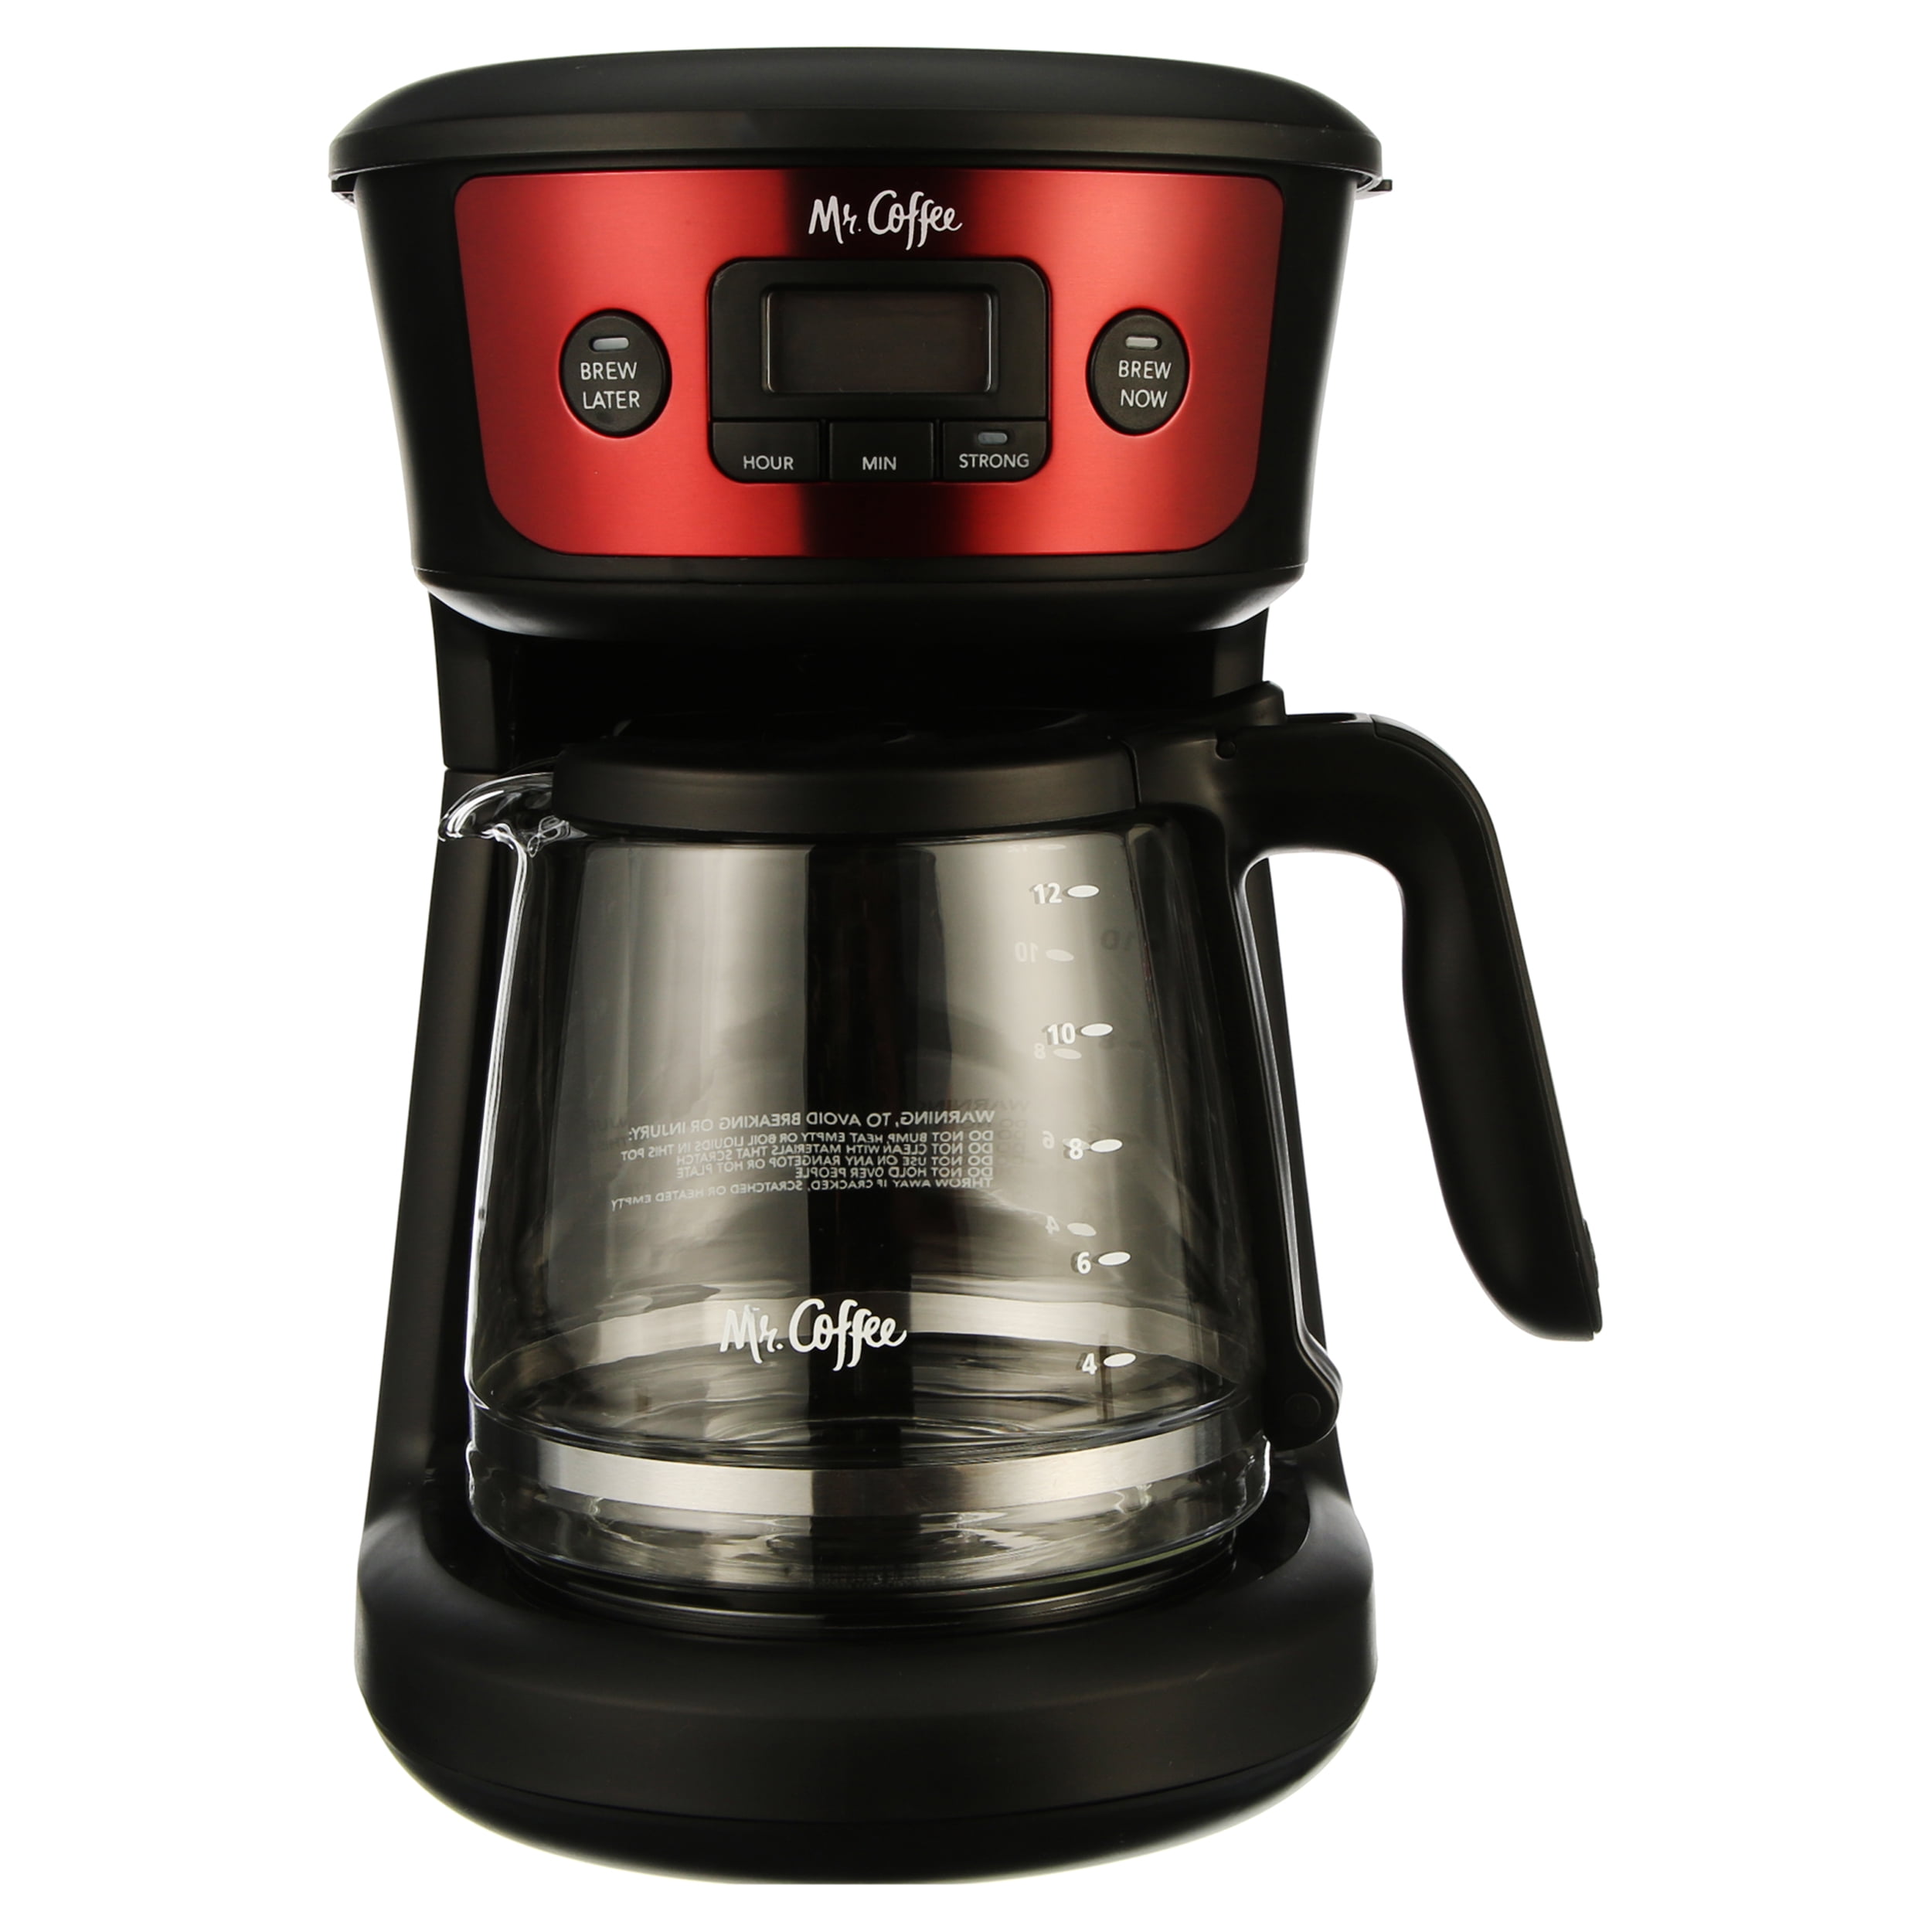 Mr. Coffee Smart Optimal Brew review: A smarter Mr. Coffee that